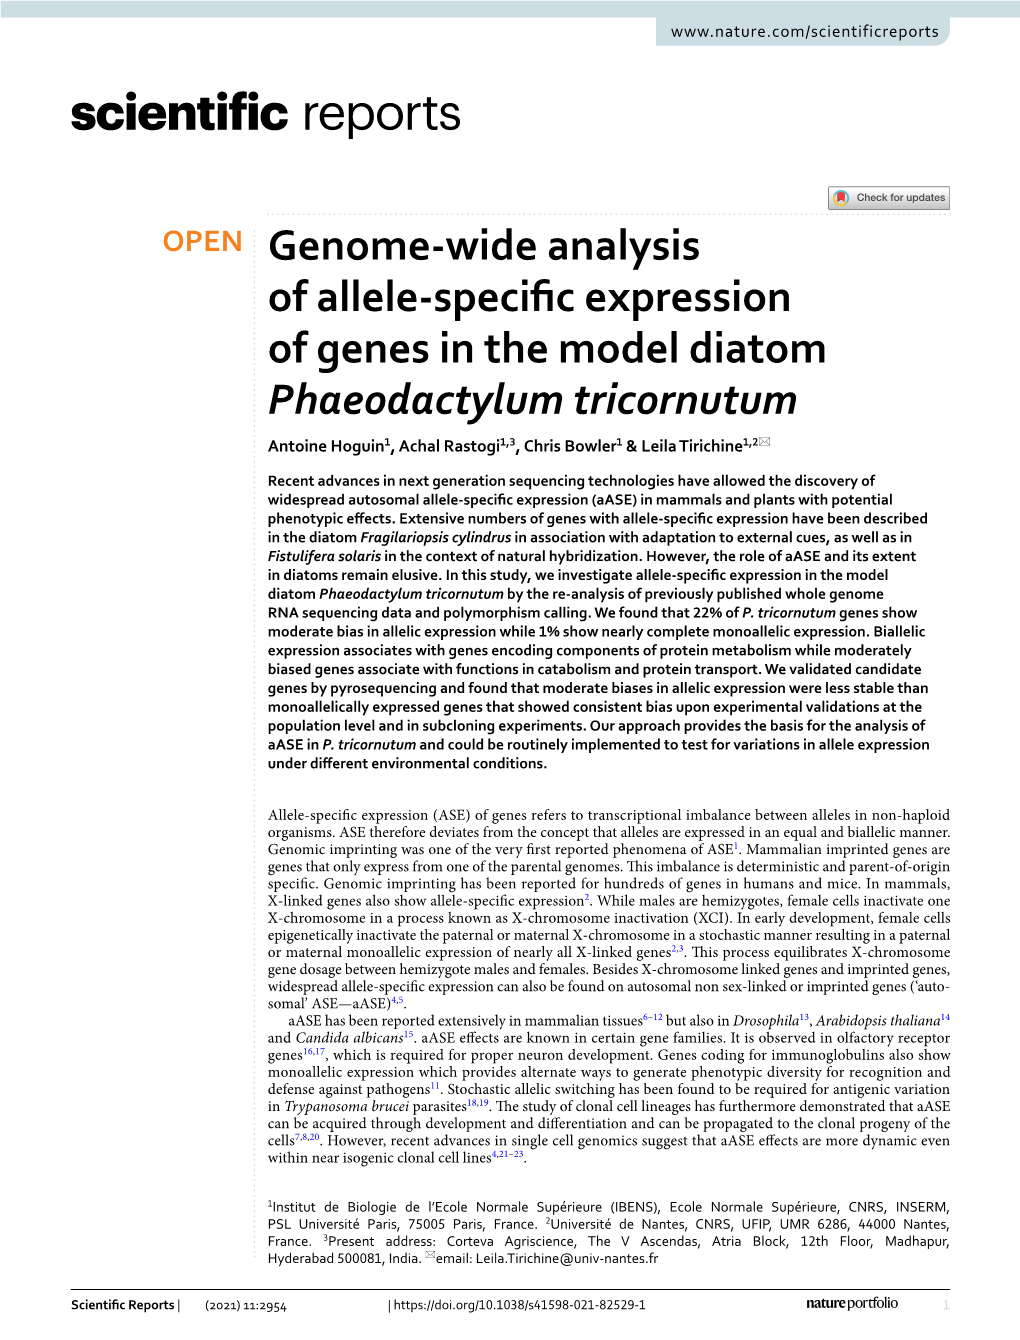 Genome-Wide Analysis of Allele-Specific Expression of Genes